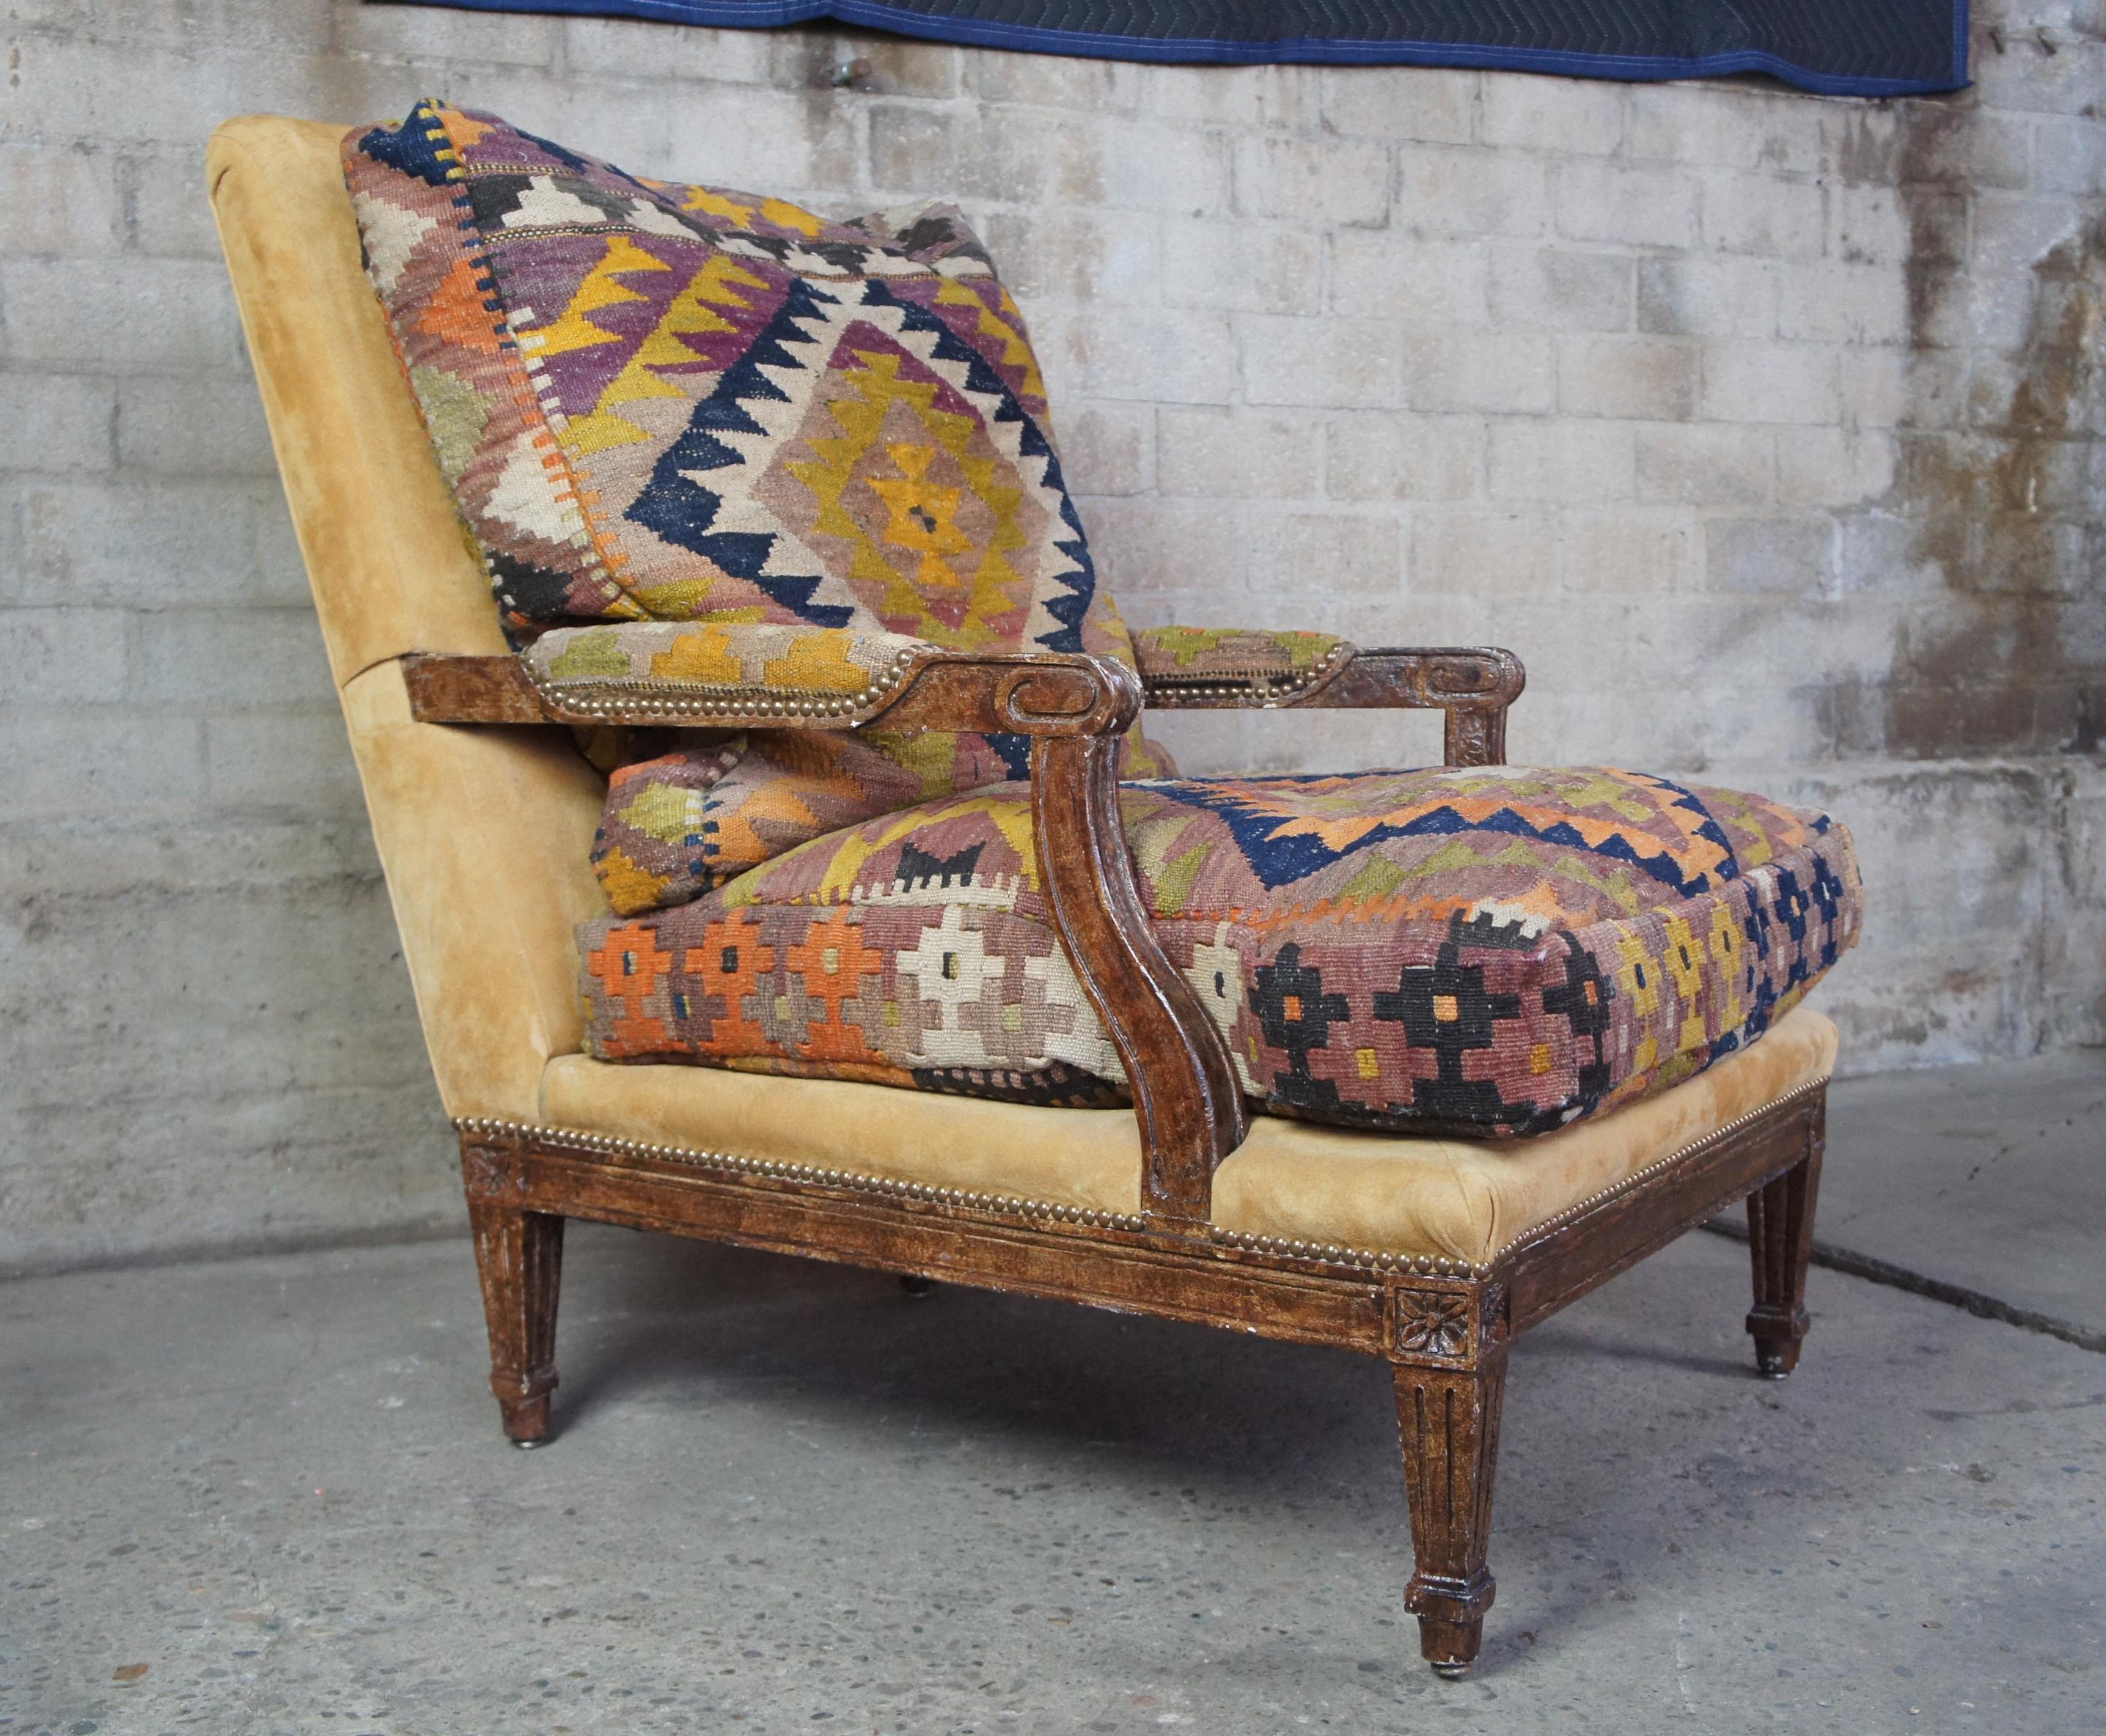 20th Century Oversize Southwestern Marquis Armchair Fauteuil Louis XV Style Lounge Rug Kilim